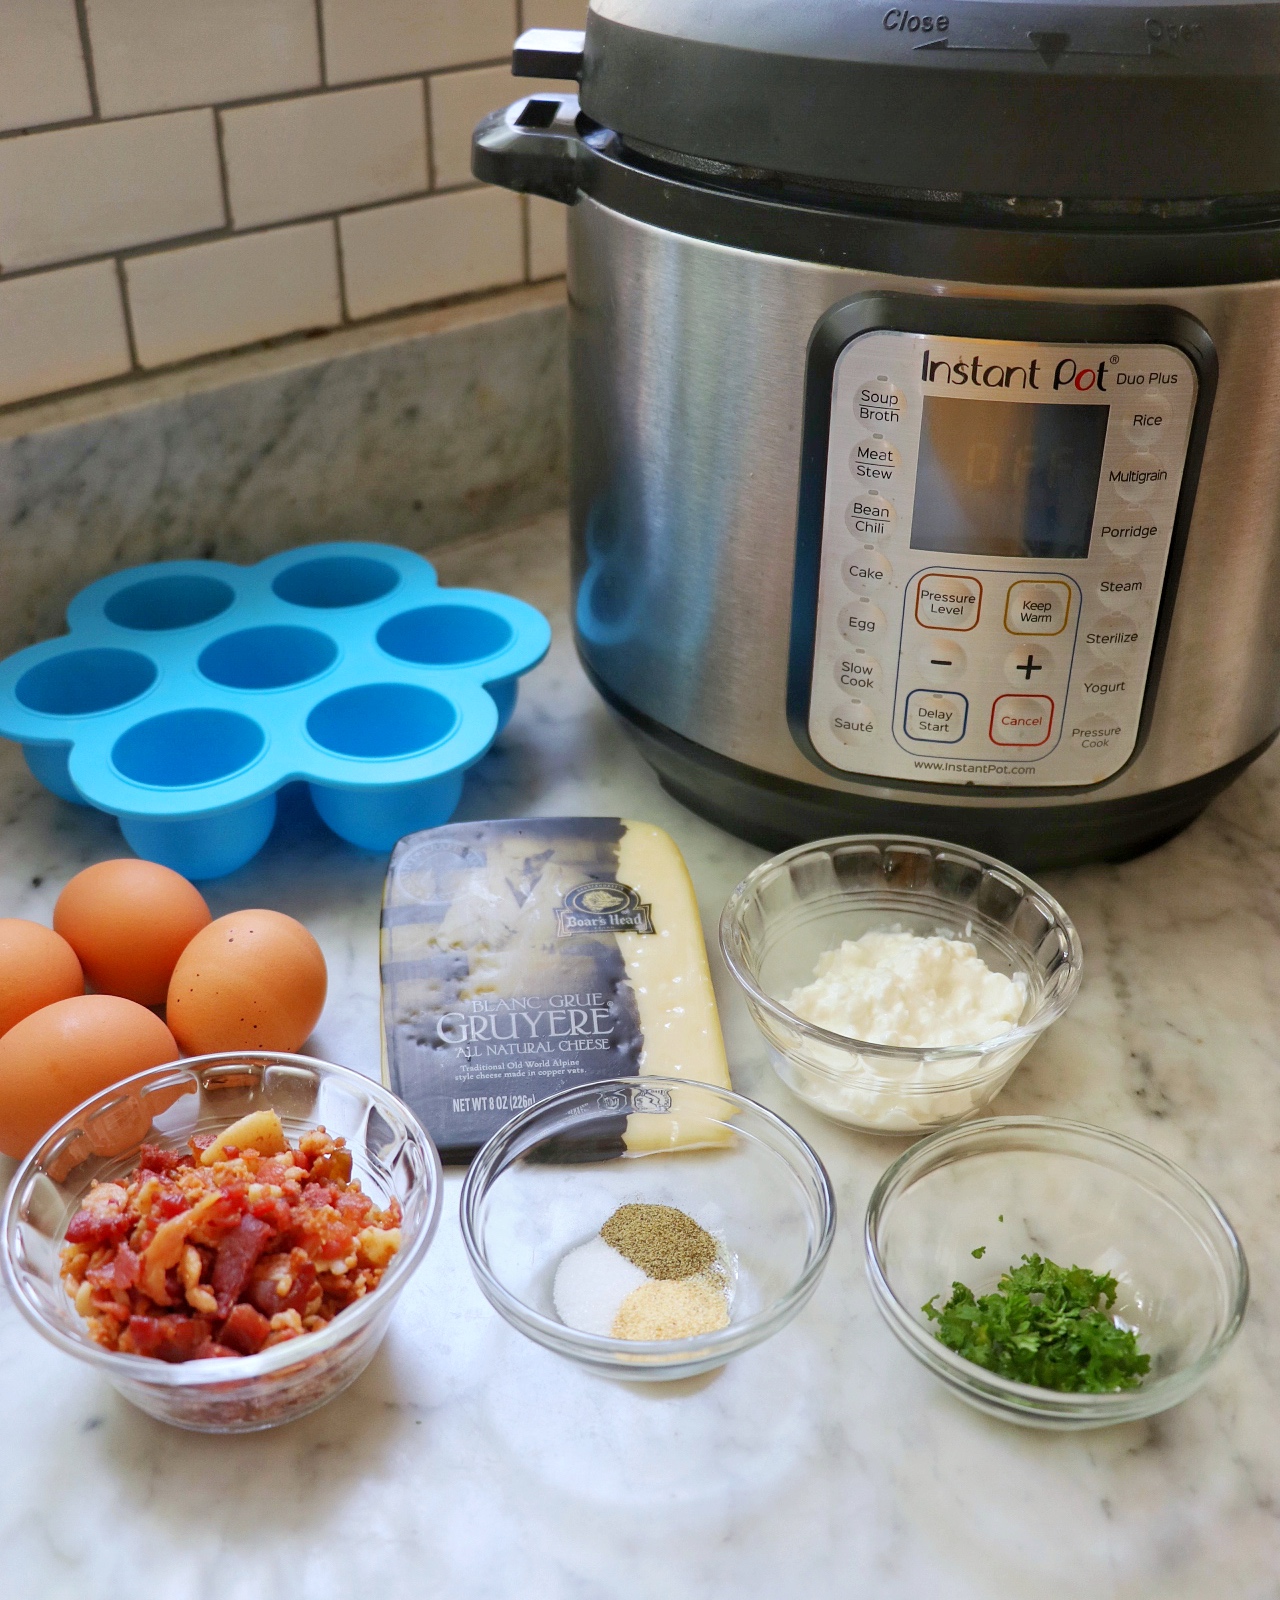 Tools and ingredients needed to make Instant Pot Starbucks egg bites